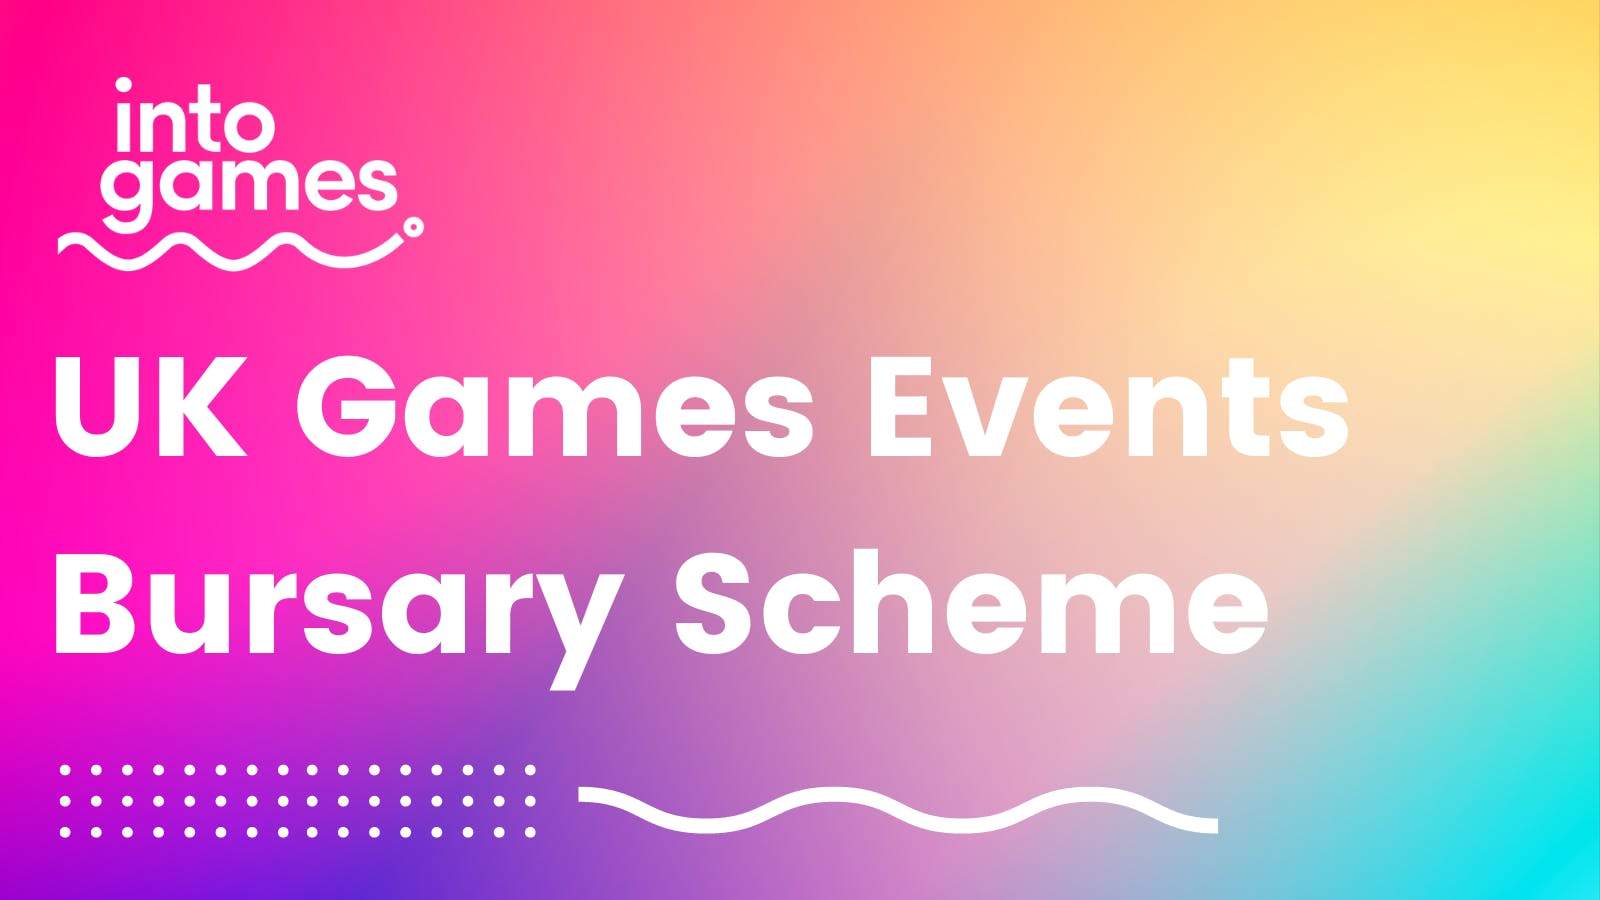 Free Tickets to UK Games Events for care-leavers and low-income backgrounds